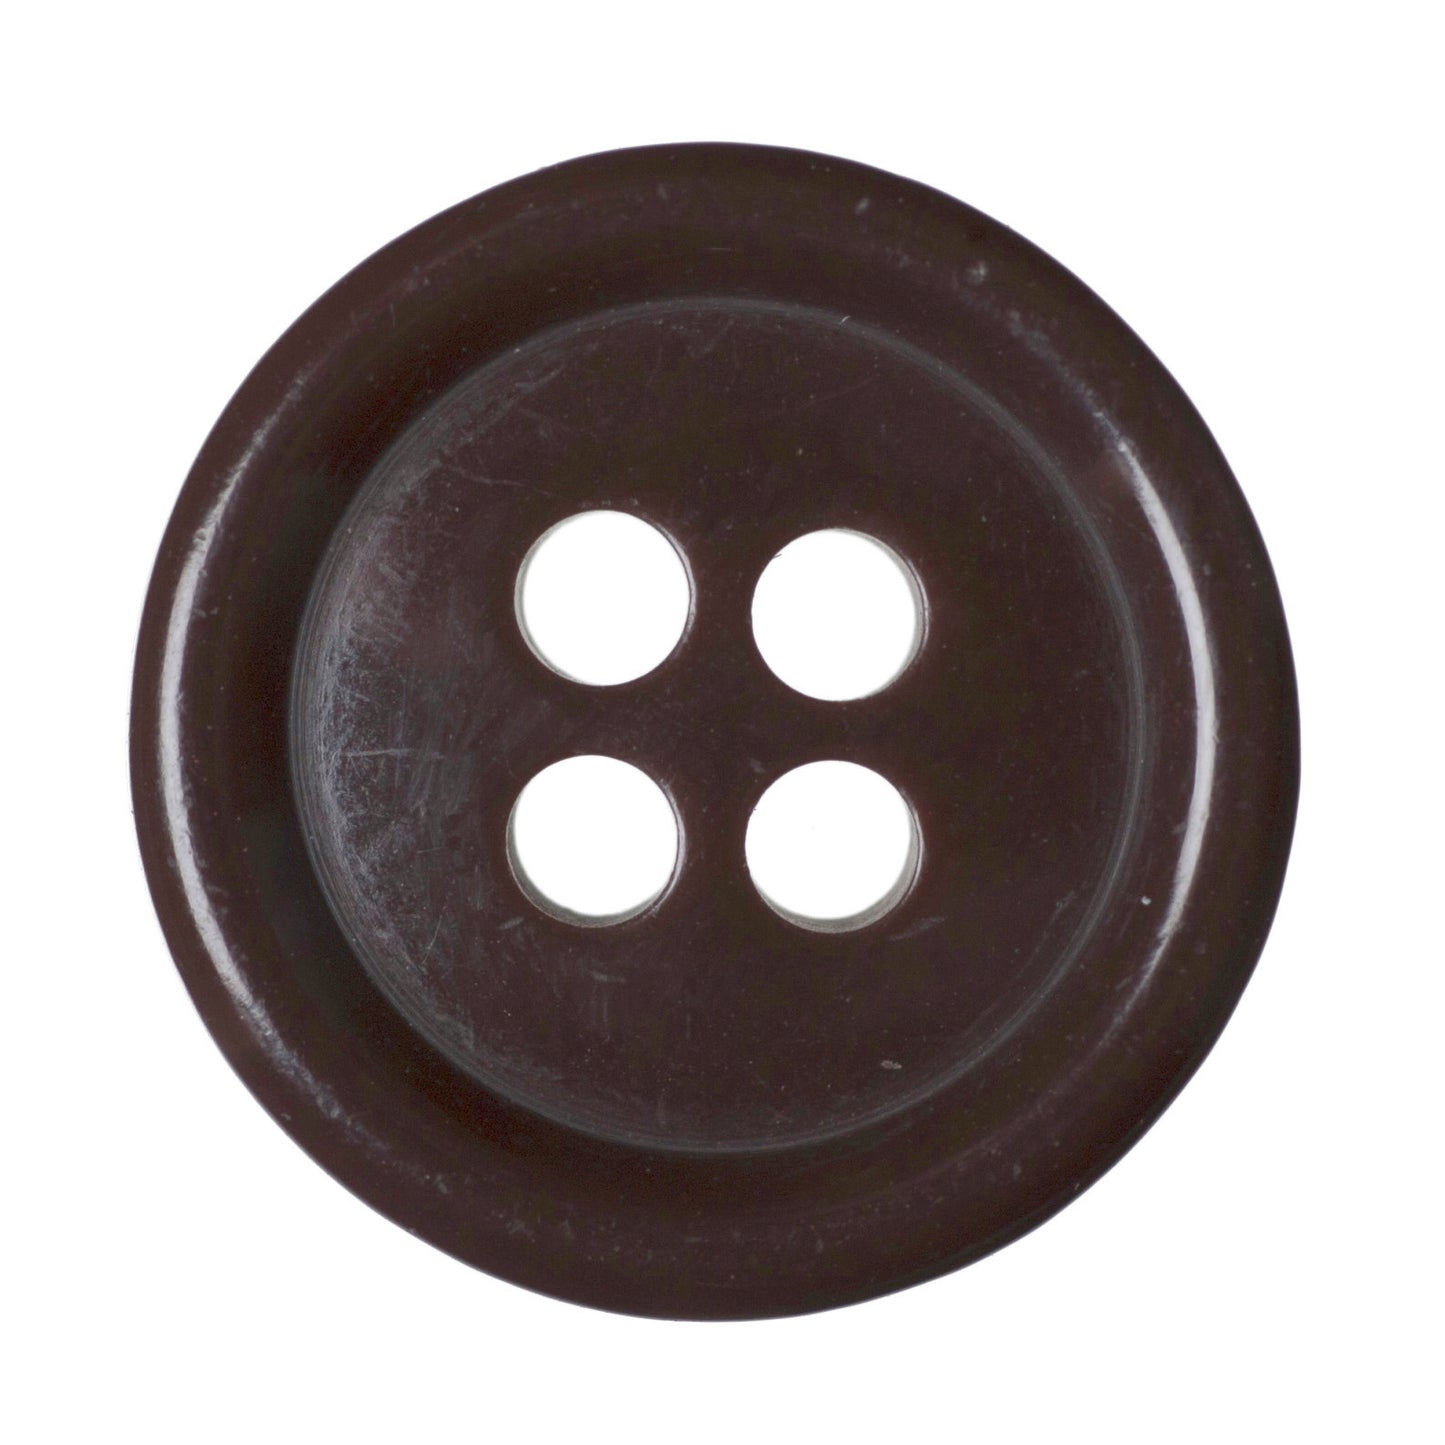 4 Hole Solid Jacket Button - 23mm - Brown [LD24.3]